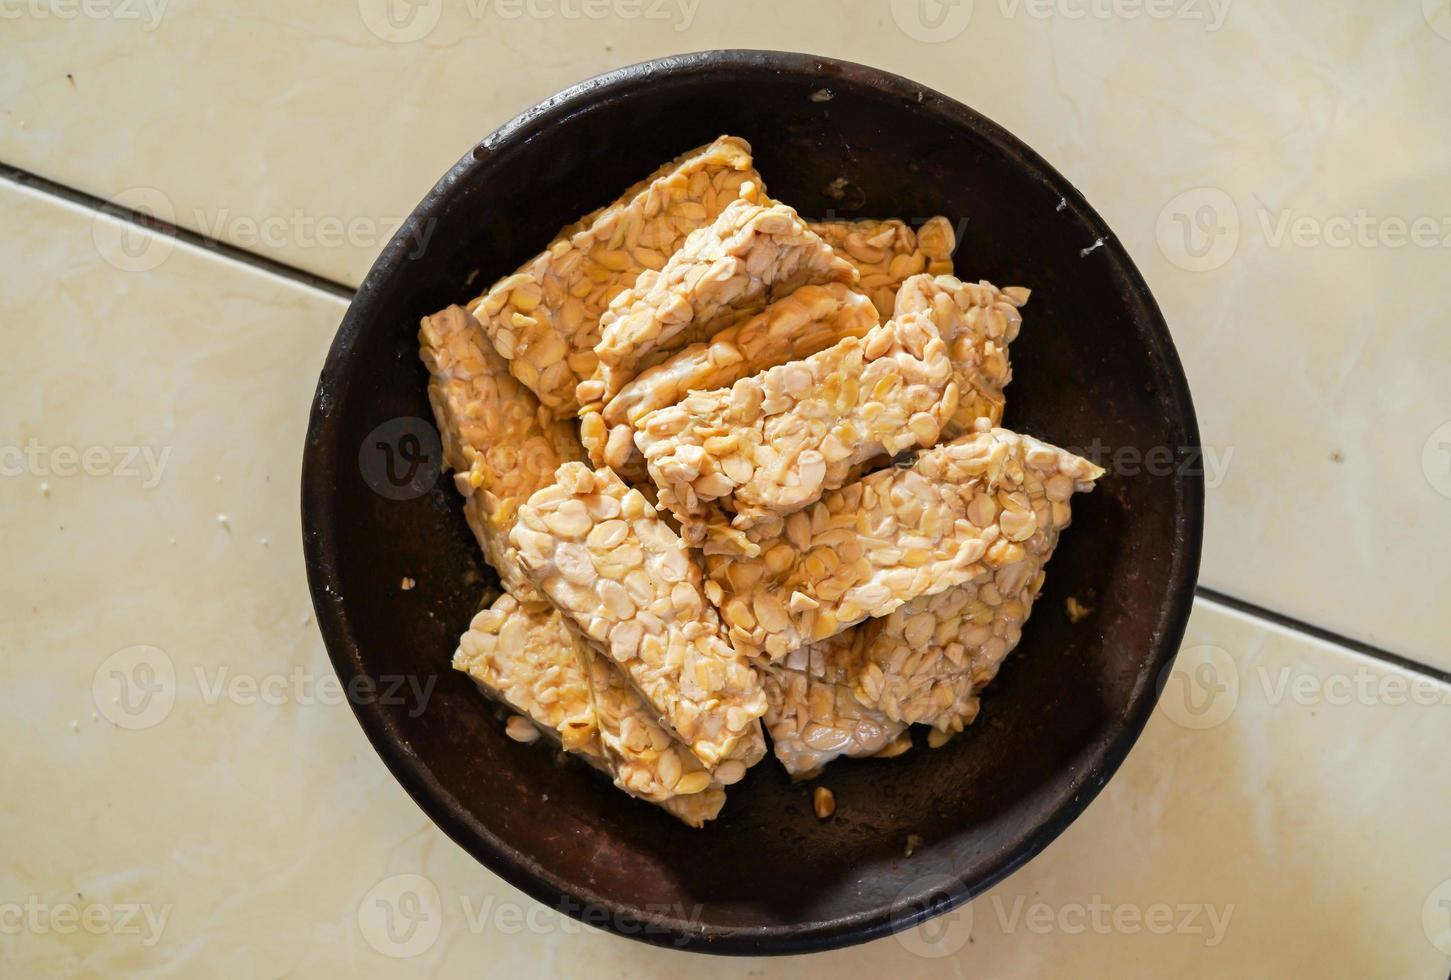 raw tempeh, ready to cook, Tempe is a traditional Indonesian food made from fermented soybeans. photo